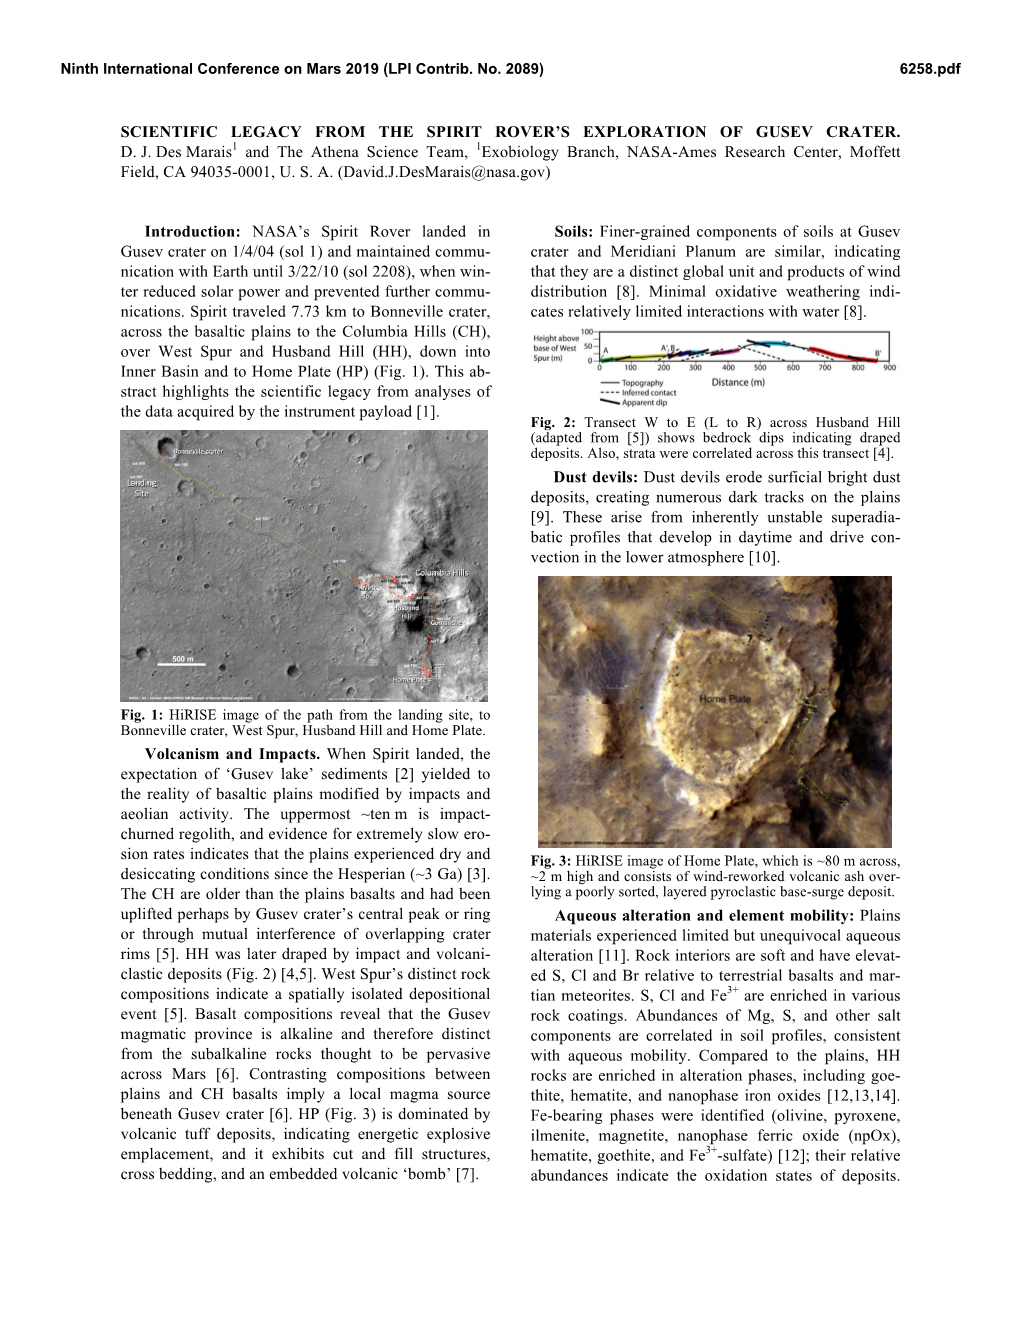 SCIENTIFIC LEGACY from the SPIRIT ROVER's EXPLORATION of GUSEV CRATER. D. J. Des Marais1 and the Athena Science Team, 1Exobiol